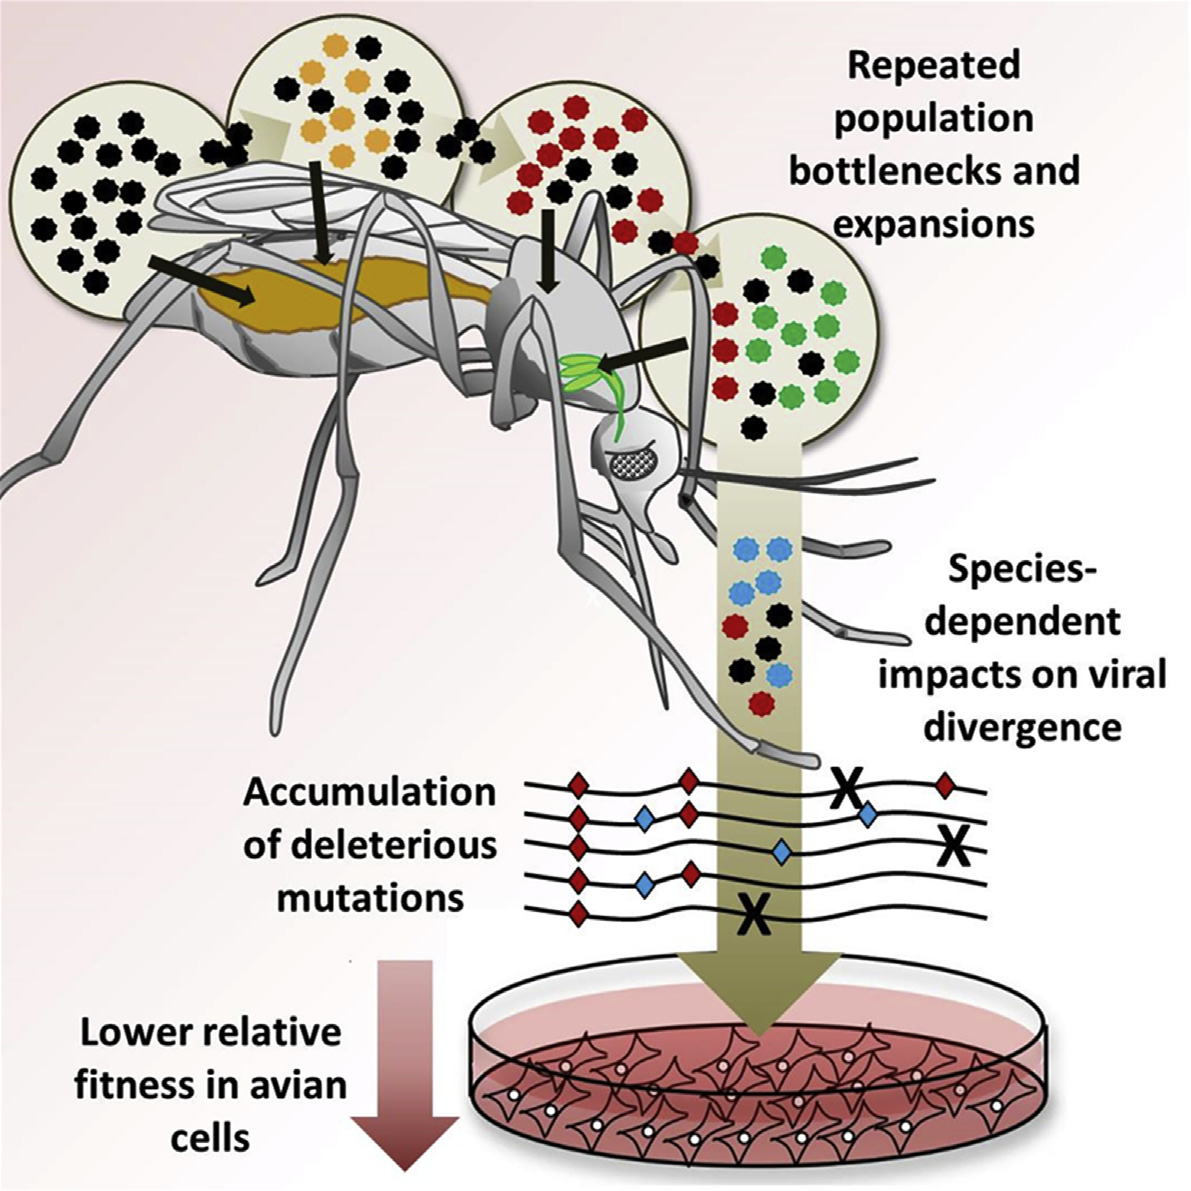 Virus evolution differs by species of mosquito carrier